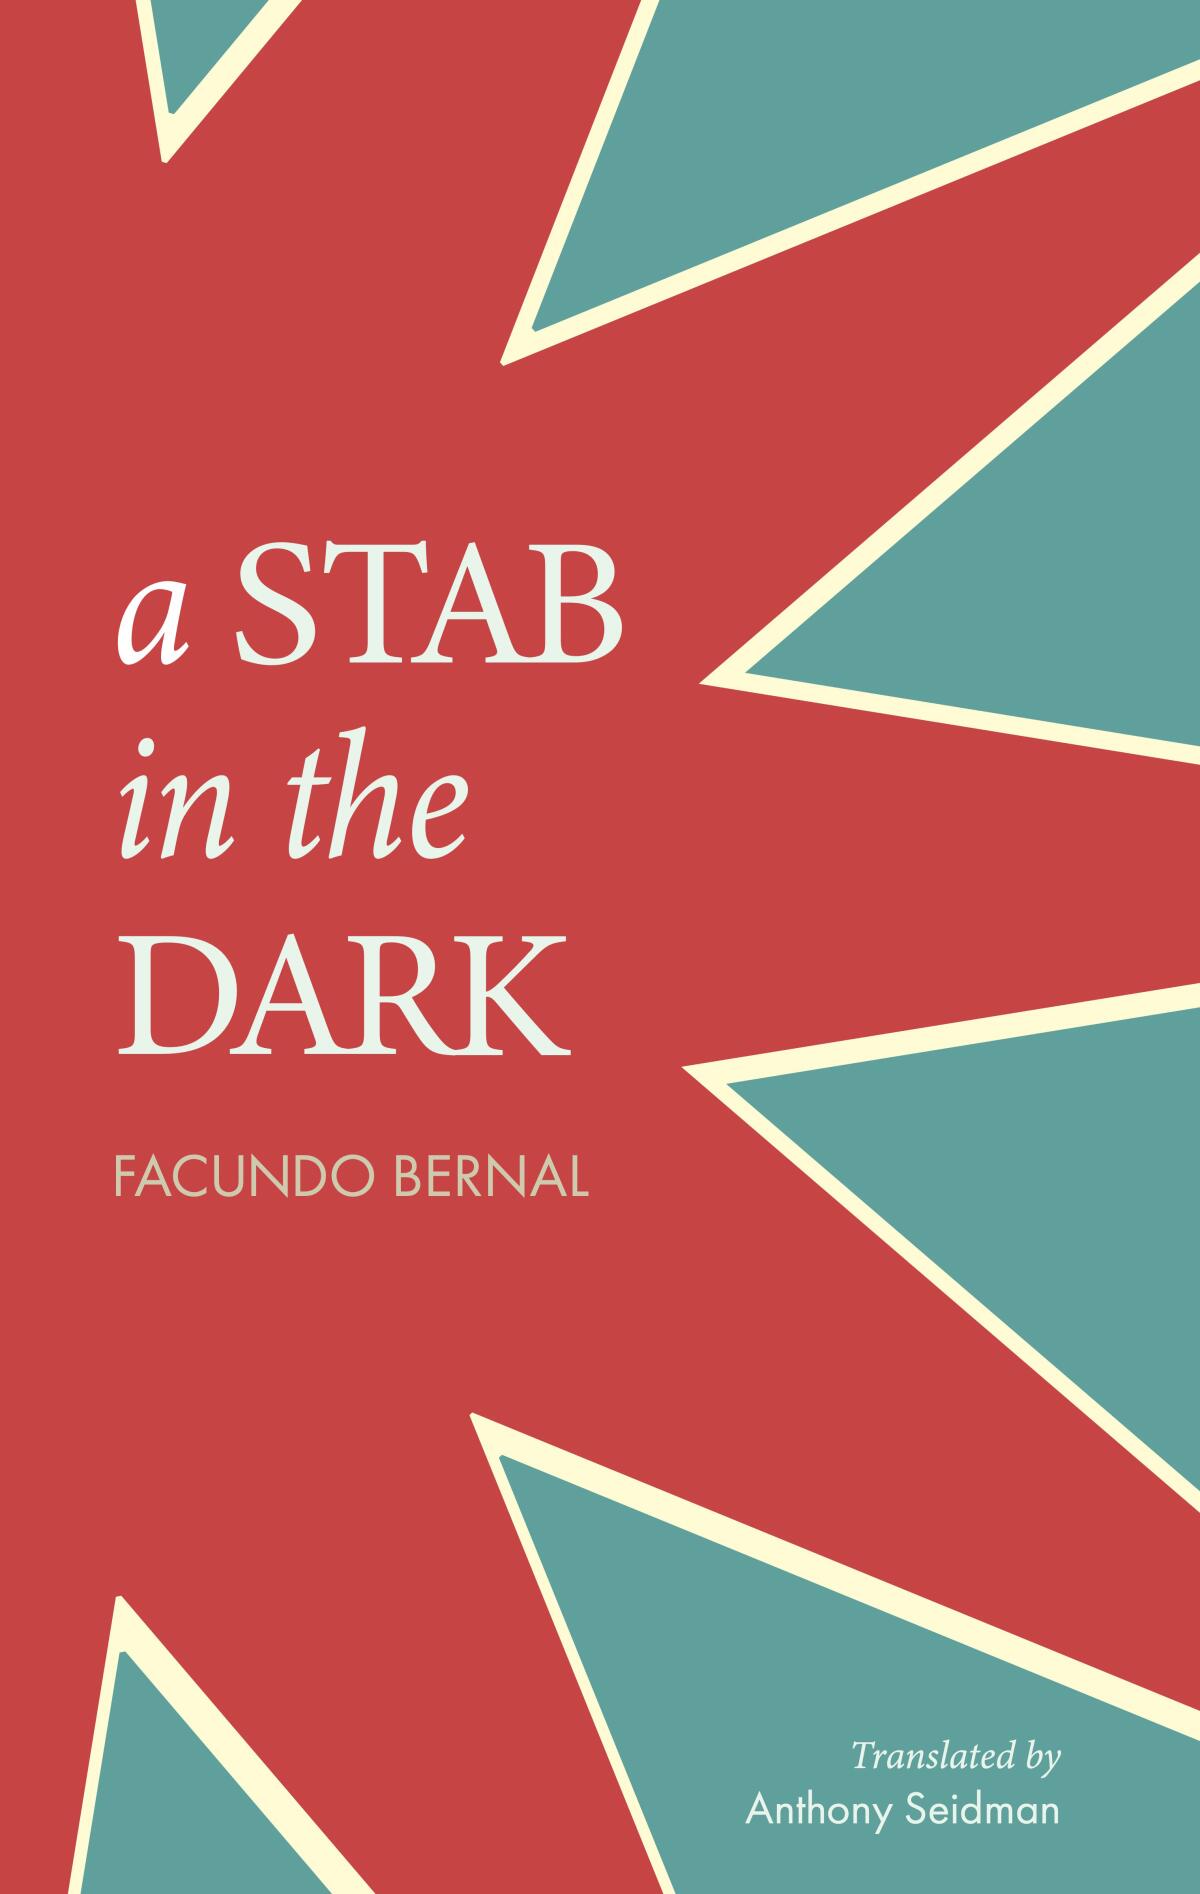 "A Stab in the Dark" by Facundo Bernal